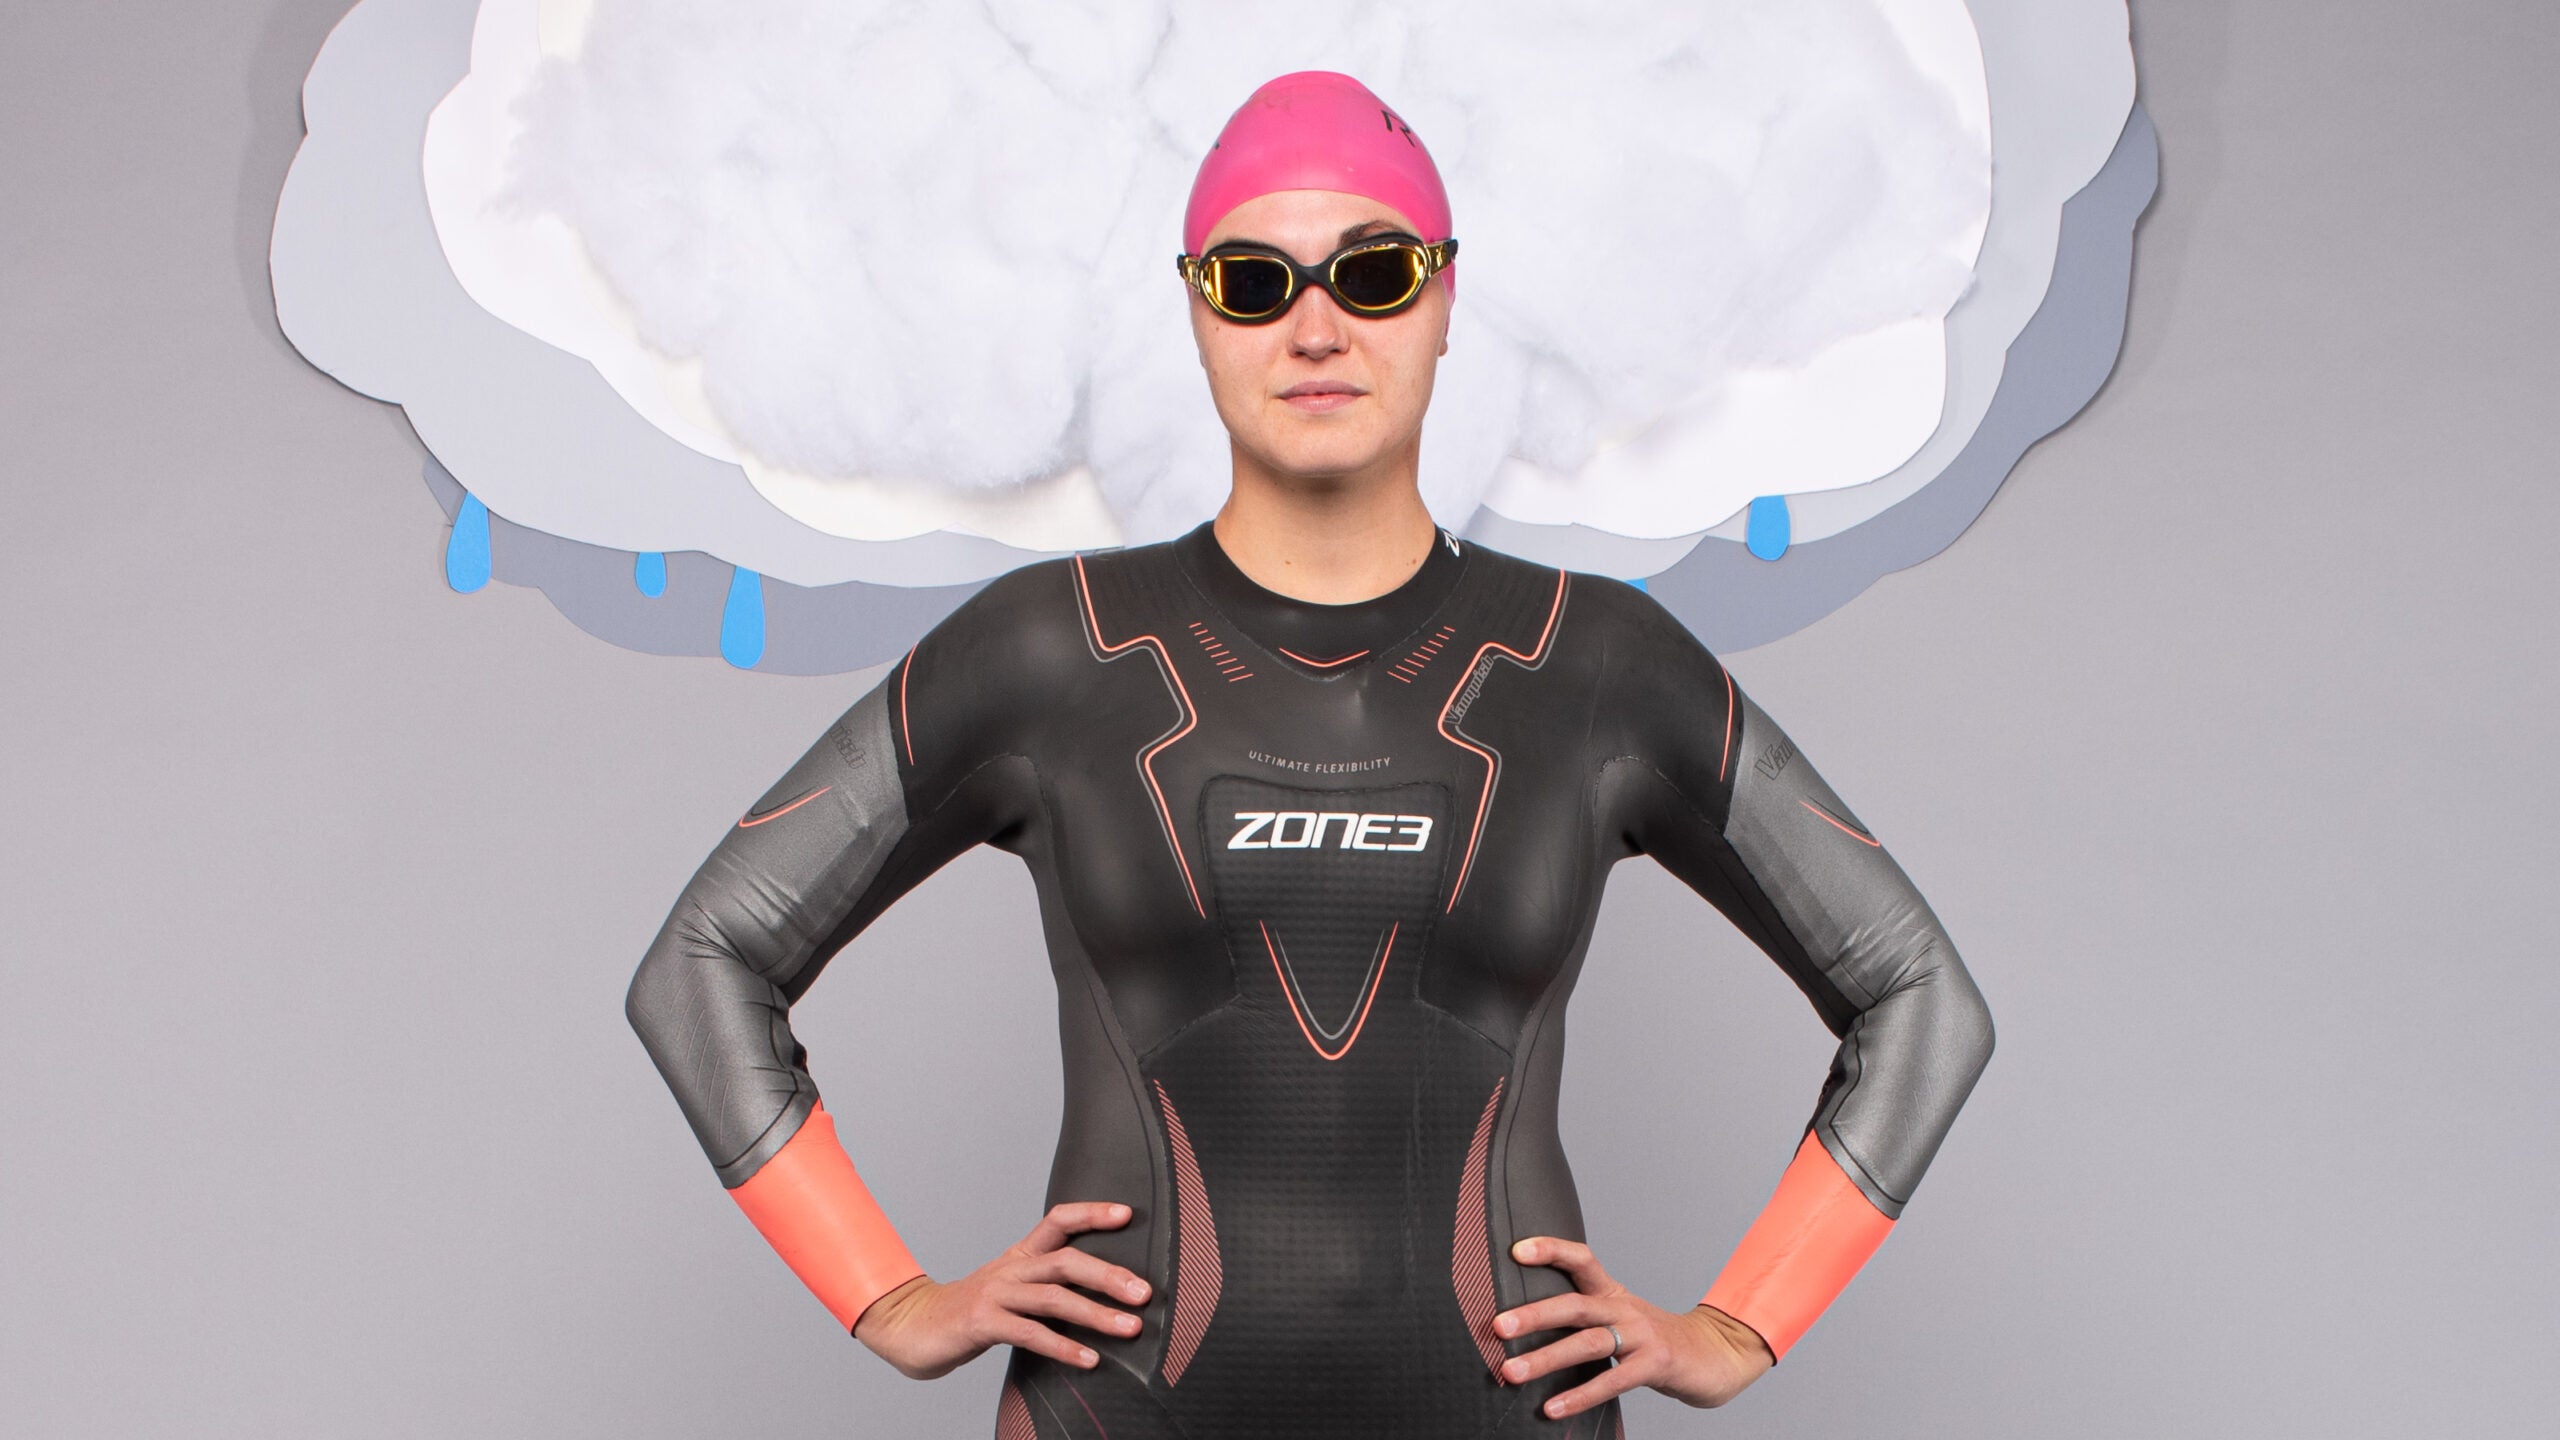 A model demonstrates What to wear for open-water swim